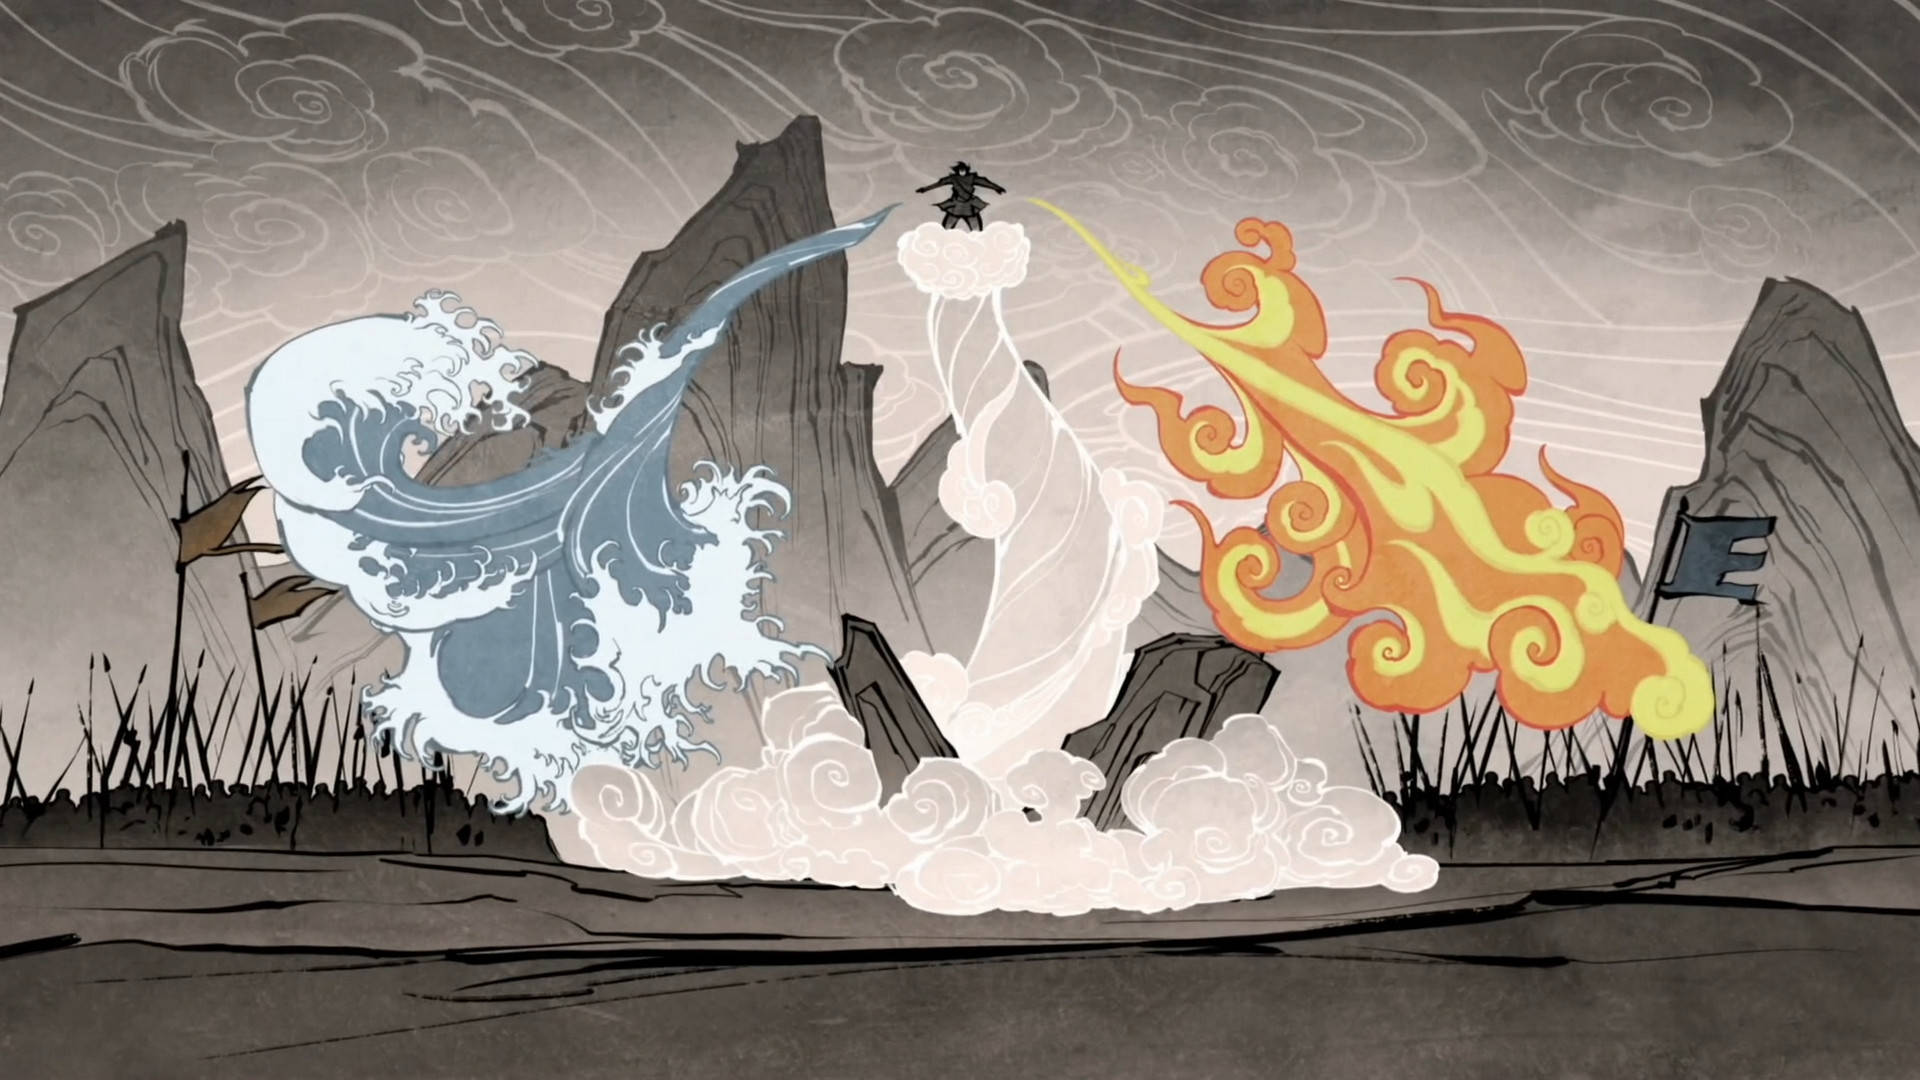 Korra Channels Her Avatar Power In Dramatic Display Background